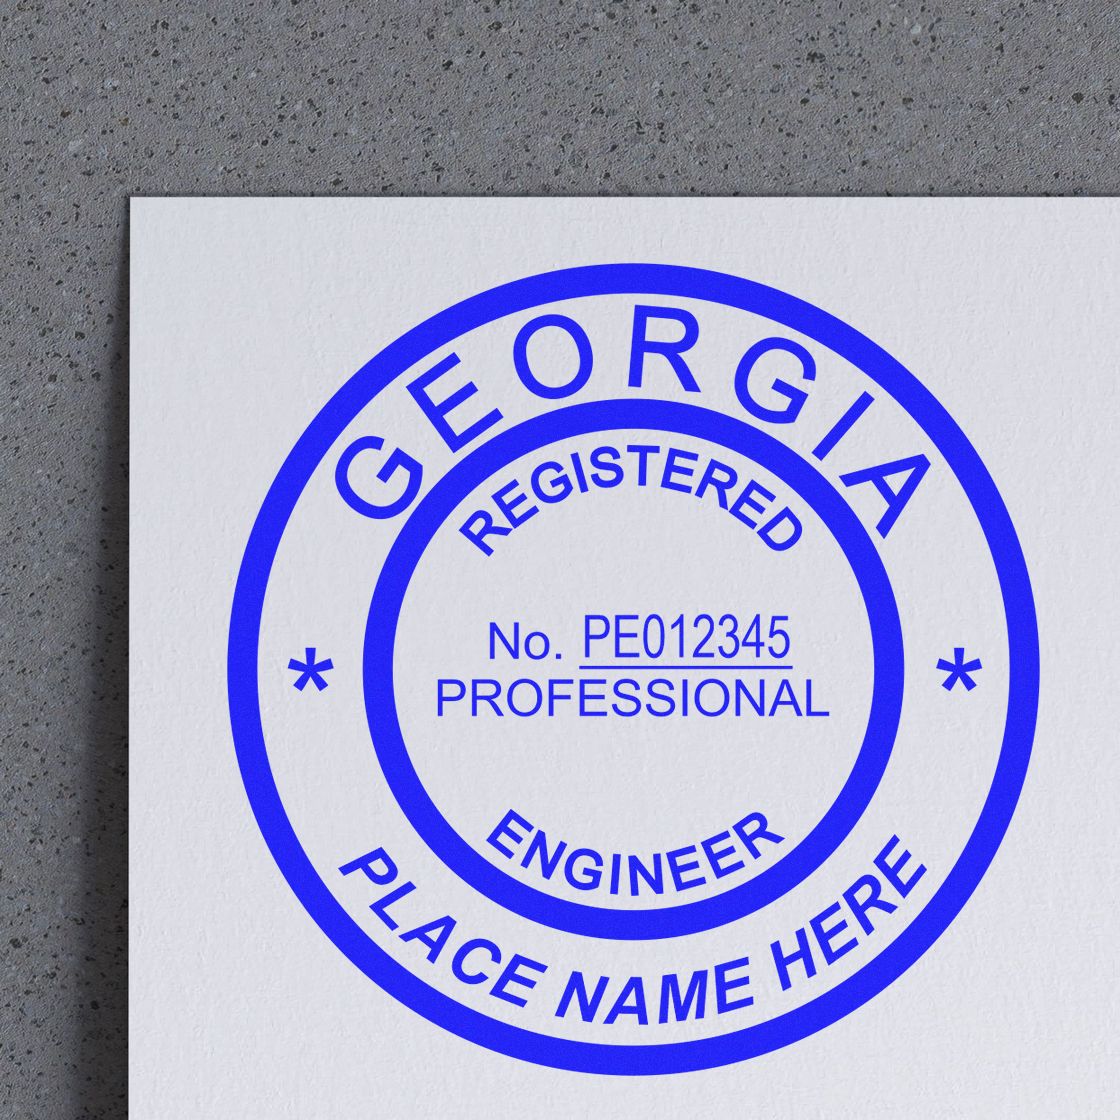 The Self-Inking Georgia PE Stamp stamp impression comes to life with a crisp, detailed photo on paper - showcasing true professional quality.